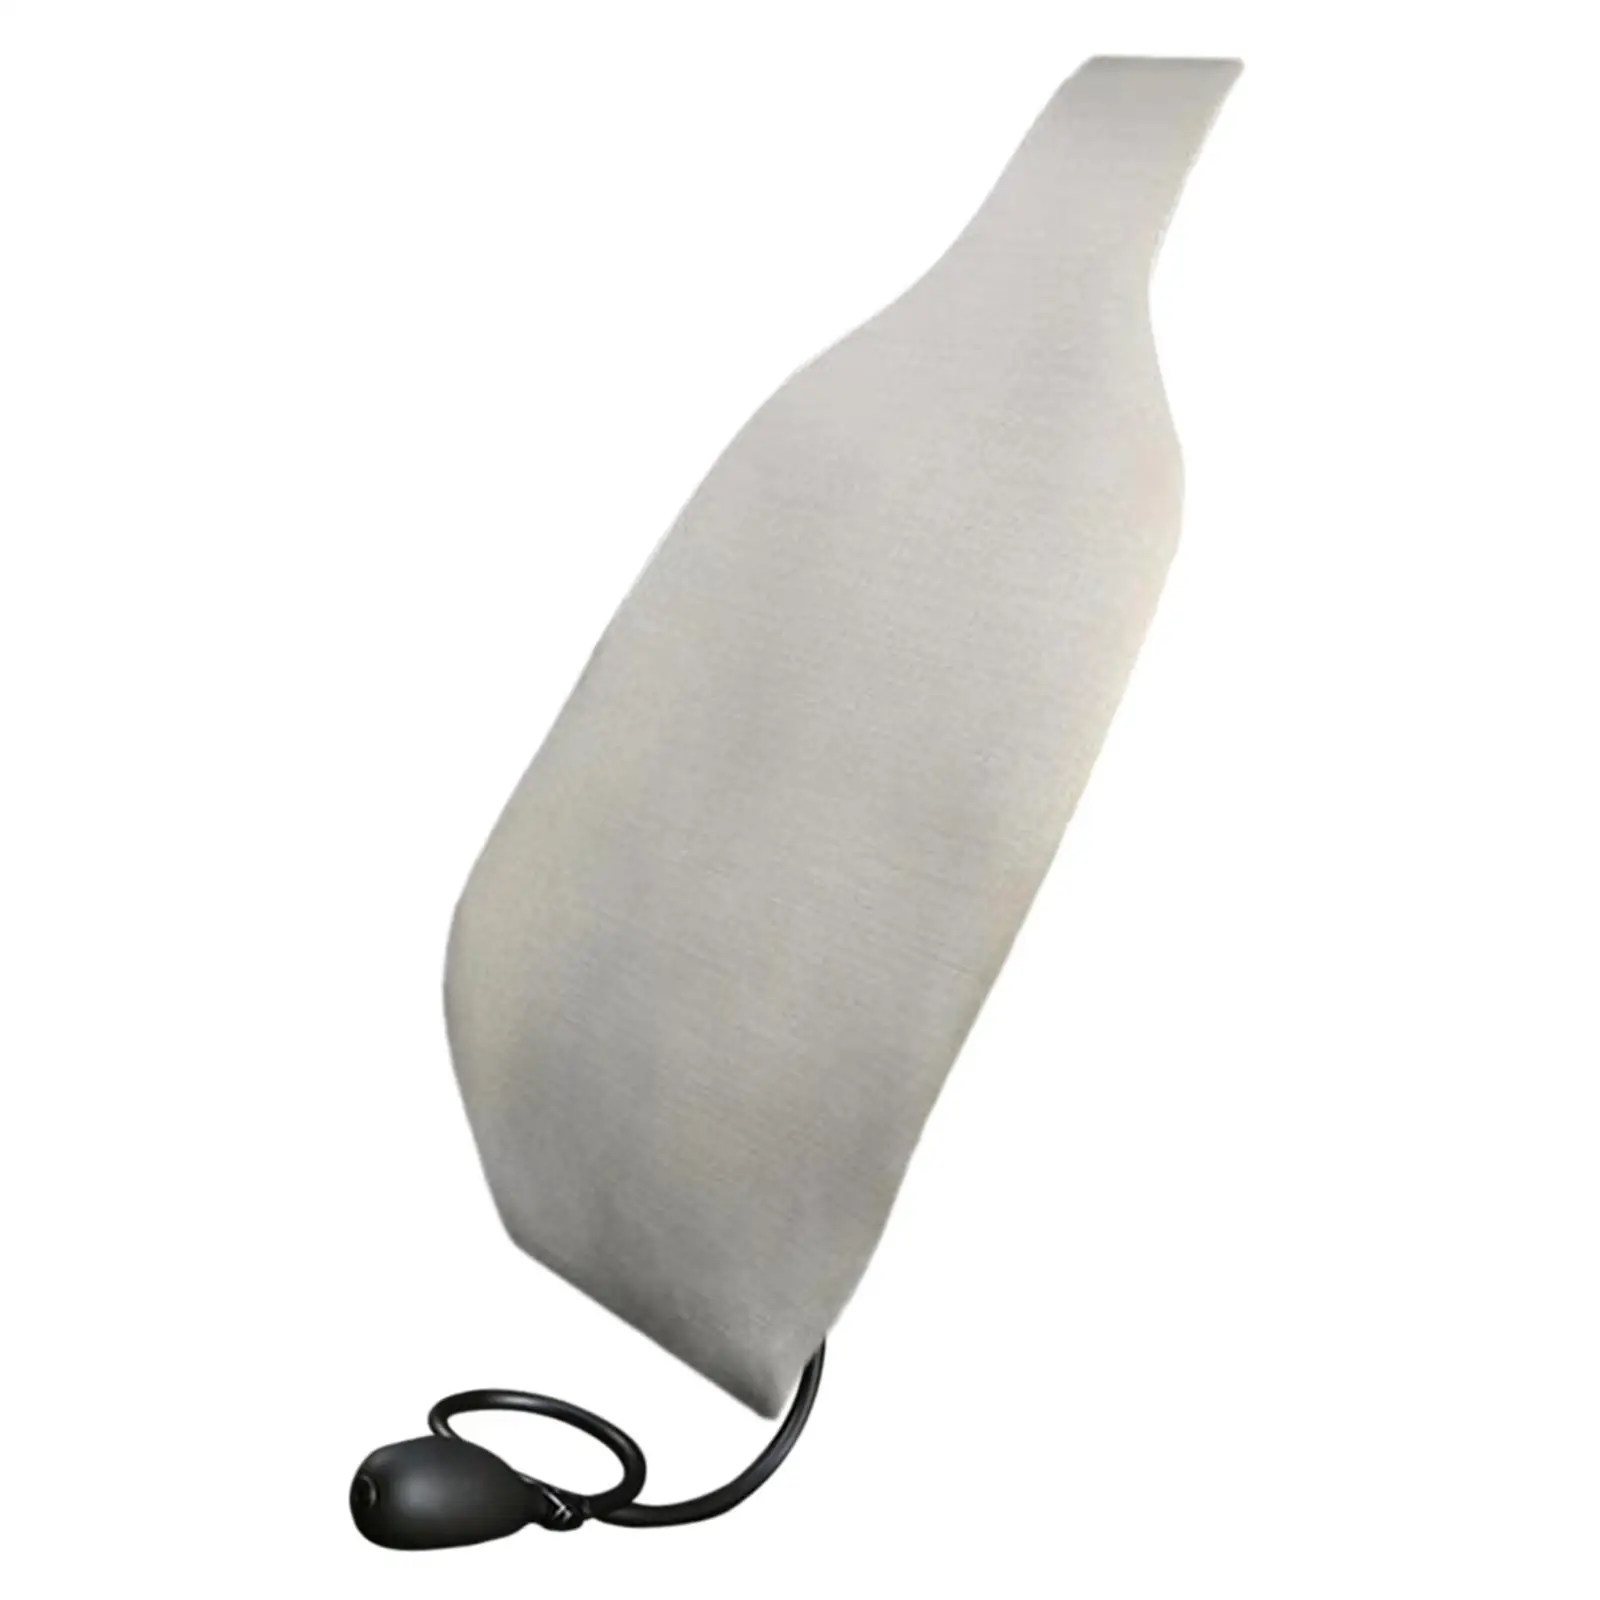 Inflatable Support Pillow Car Support Cushion Easy to Install Durable Air Motion Backrest for Long Sitting